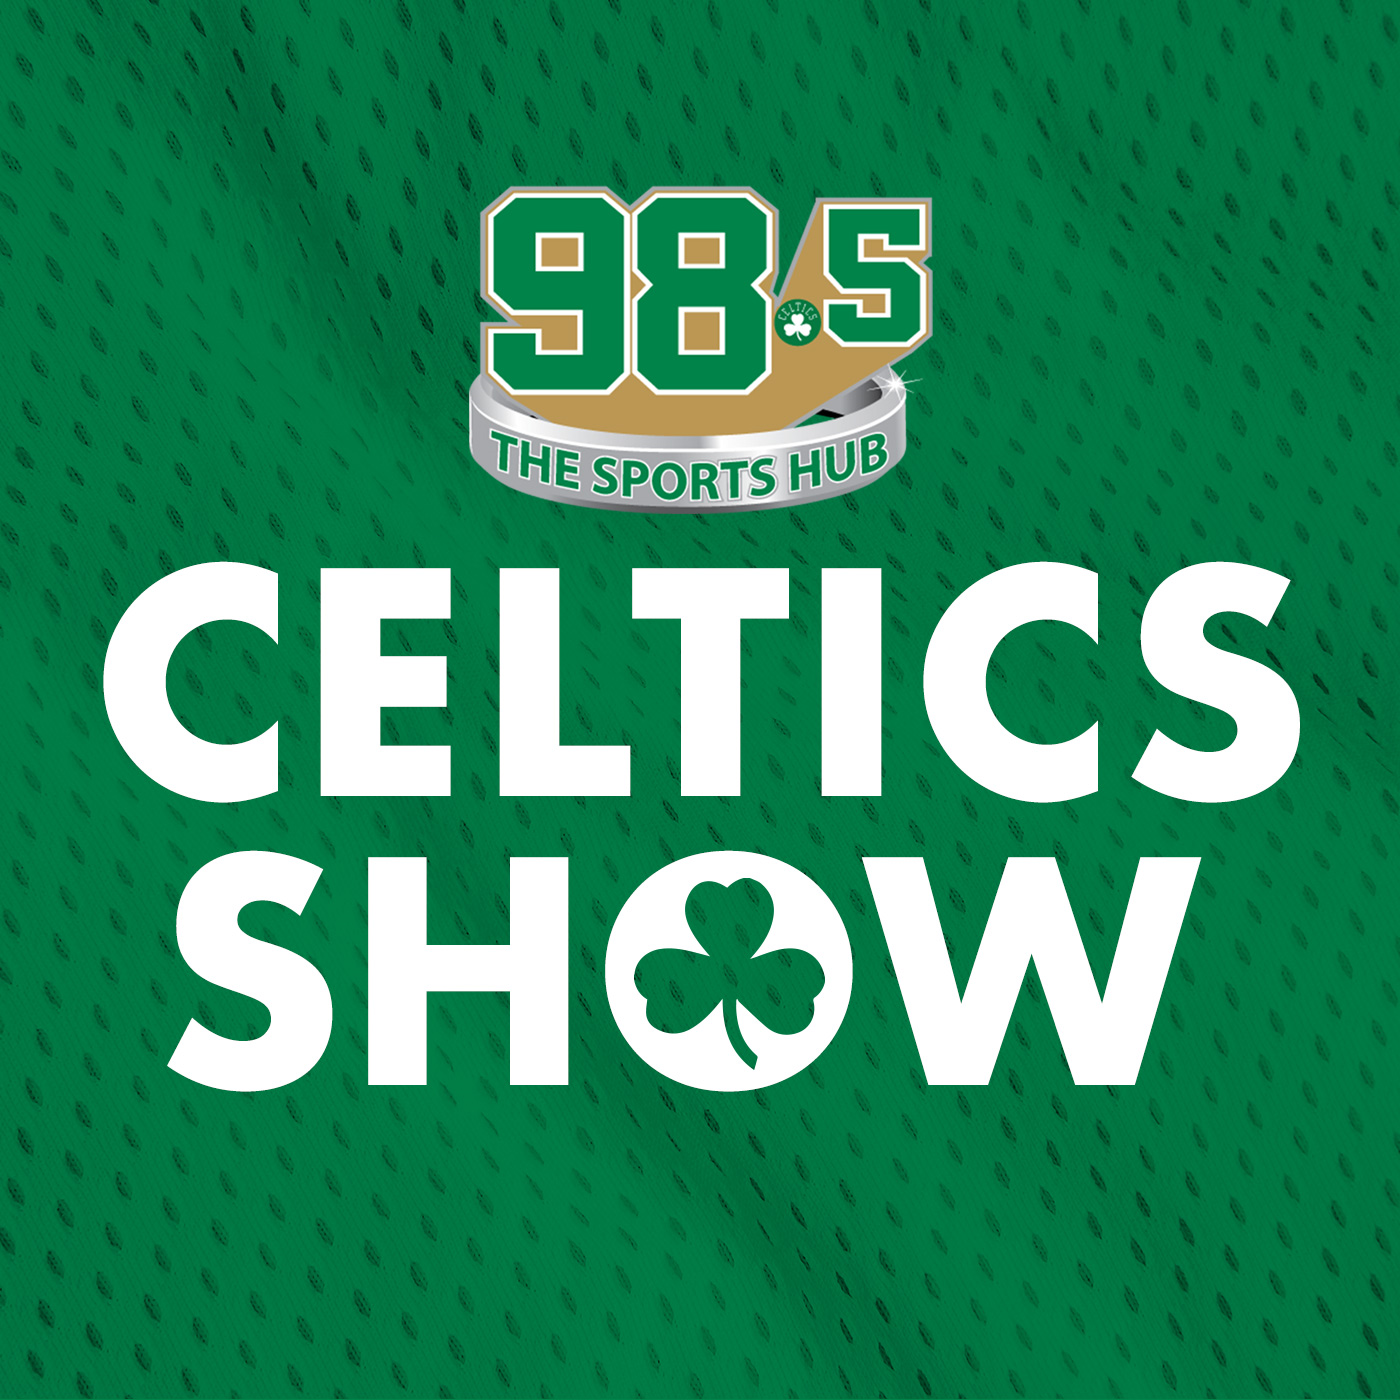 Celtics best team in NBA? // In-season tournament thoughts // Intriguing storylines around NBA